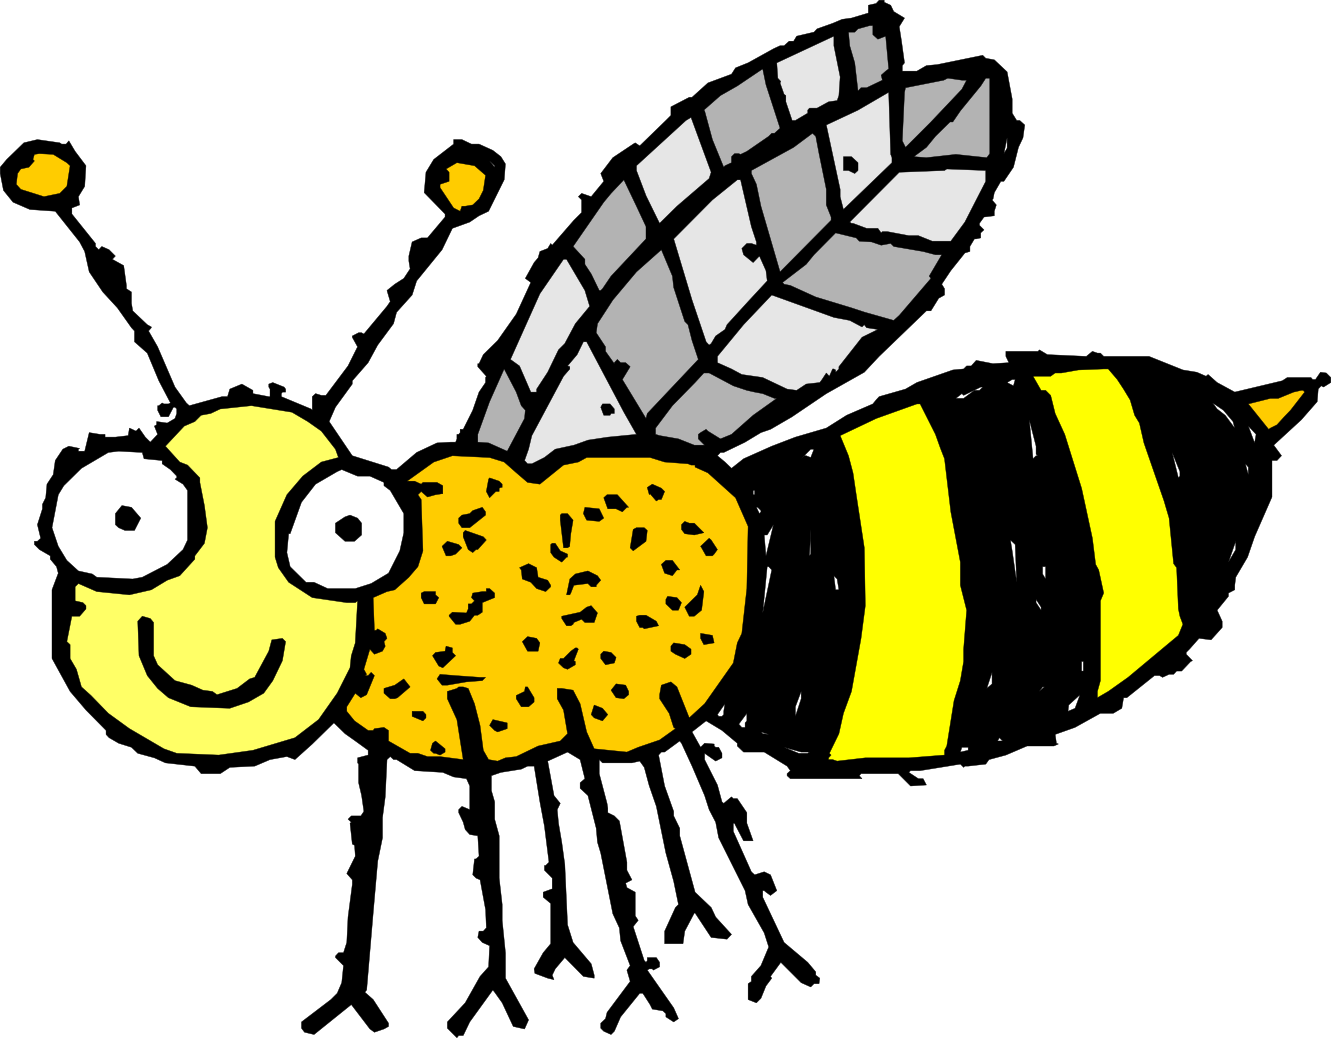 Insect clipart dead insect. Bees wasps pencil and